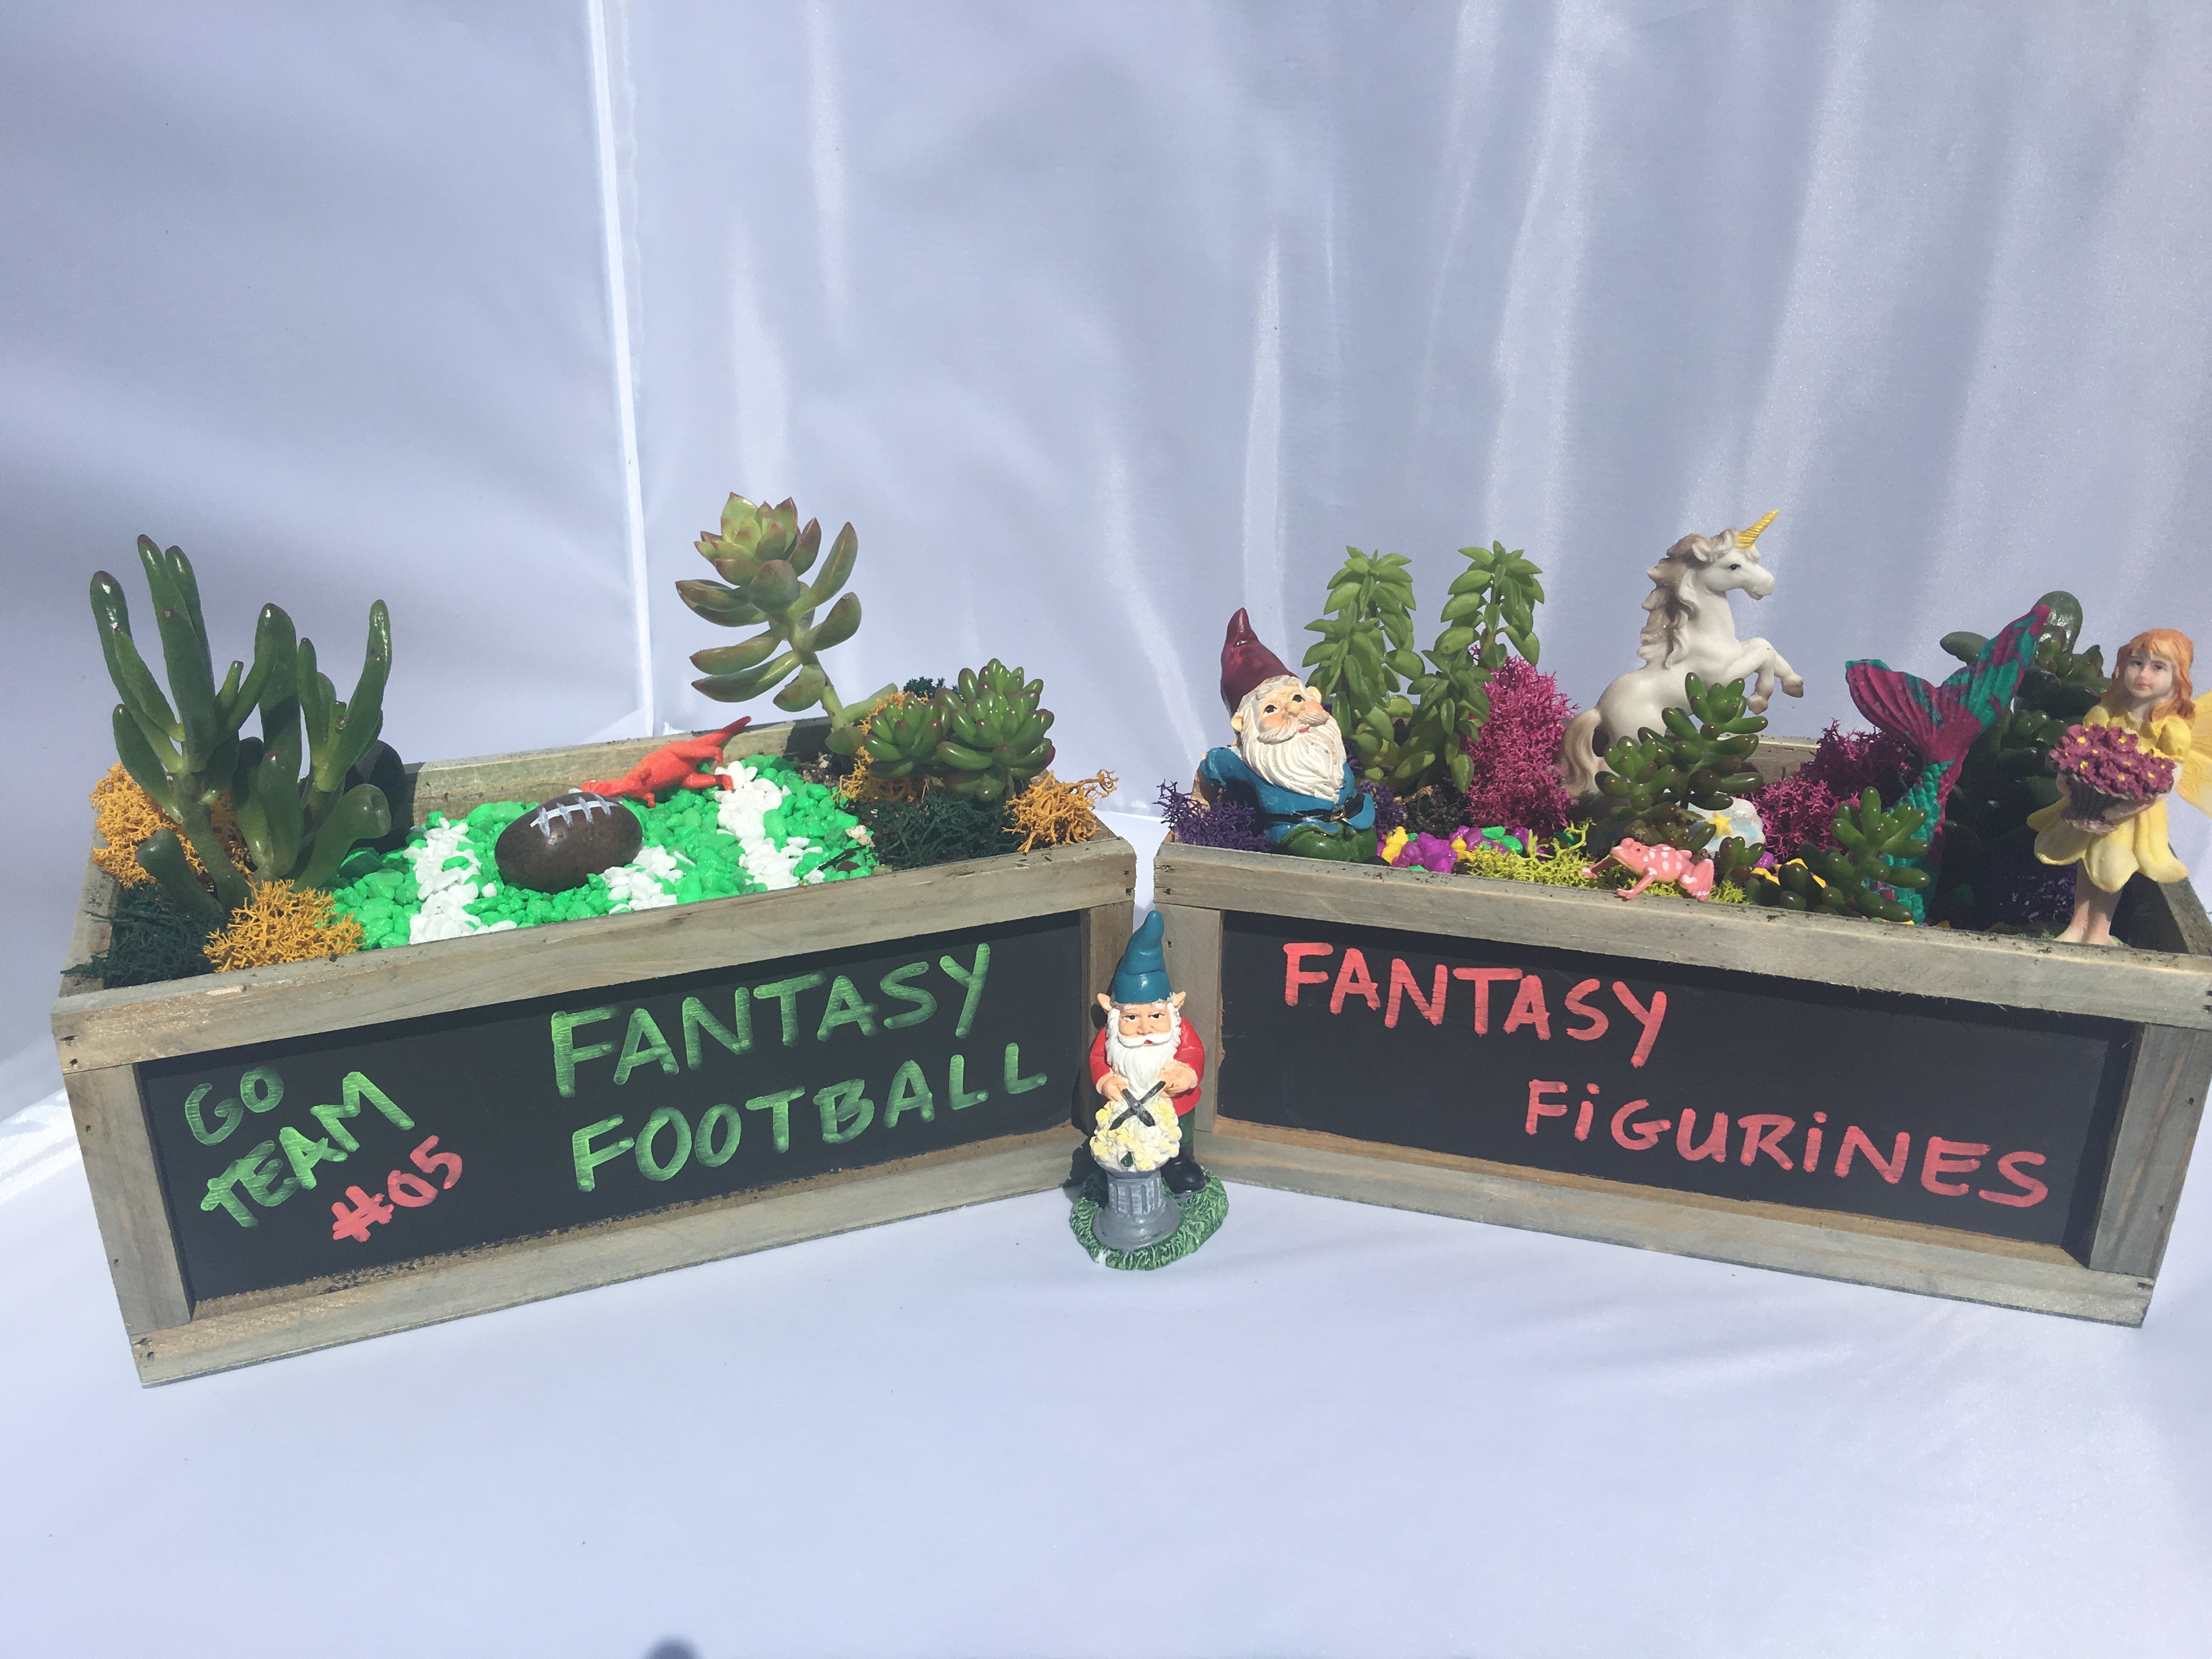 A Fantasy Football or Fantasy Figurines plant nite project by Yaymaker